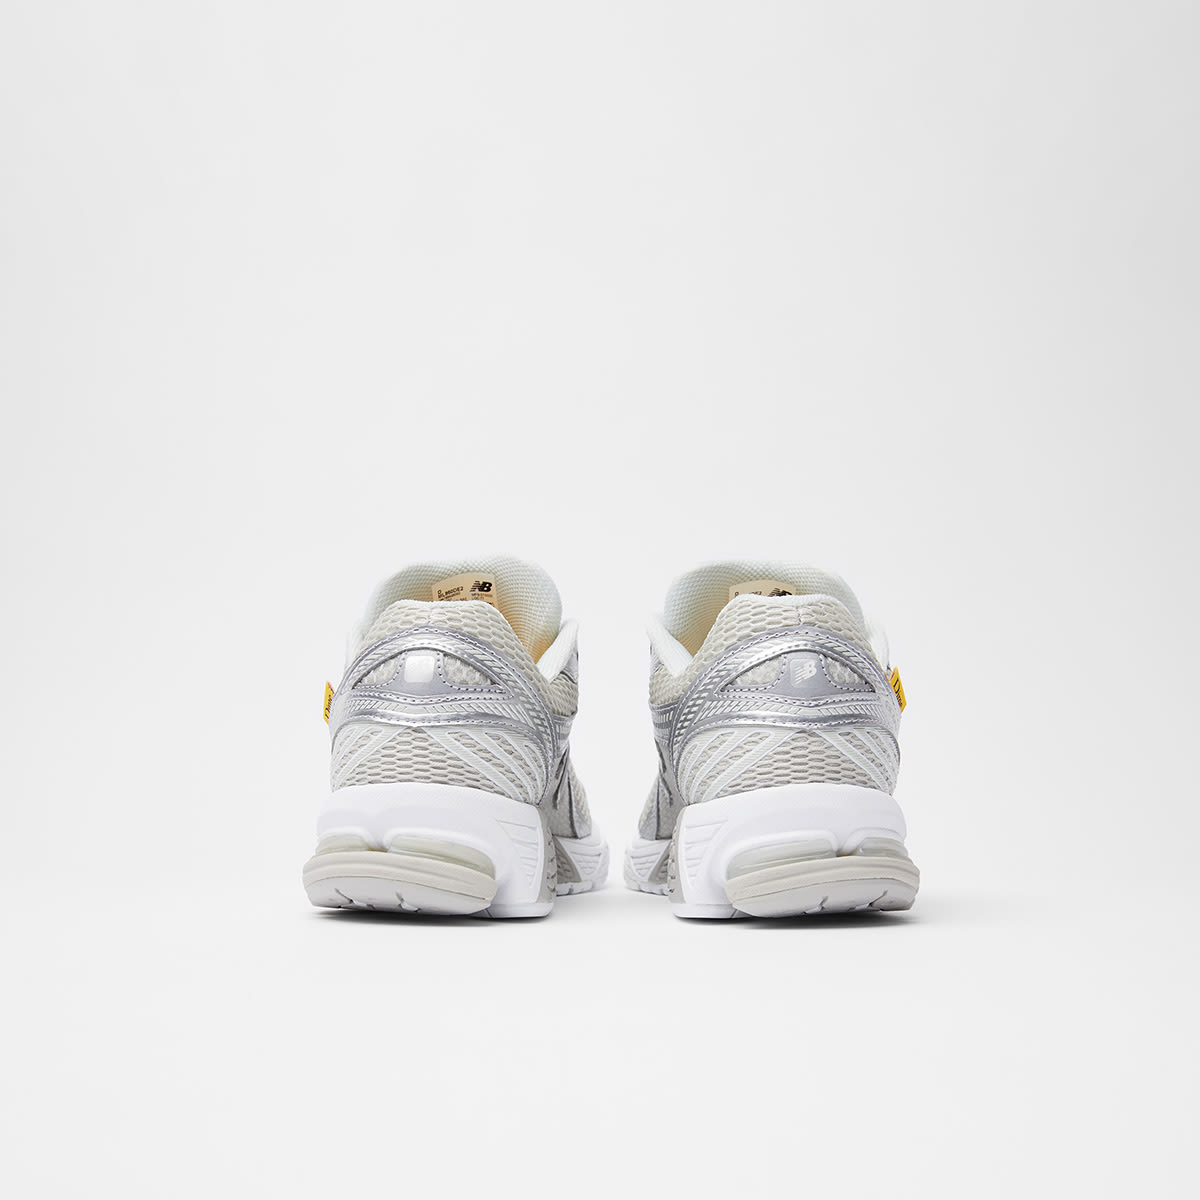 New Balance x Dime 860 v2 (Silver & White) | END. Launches